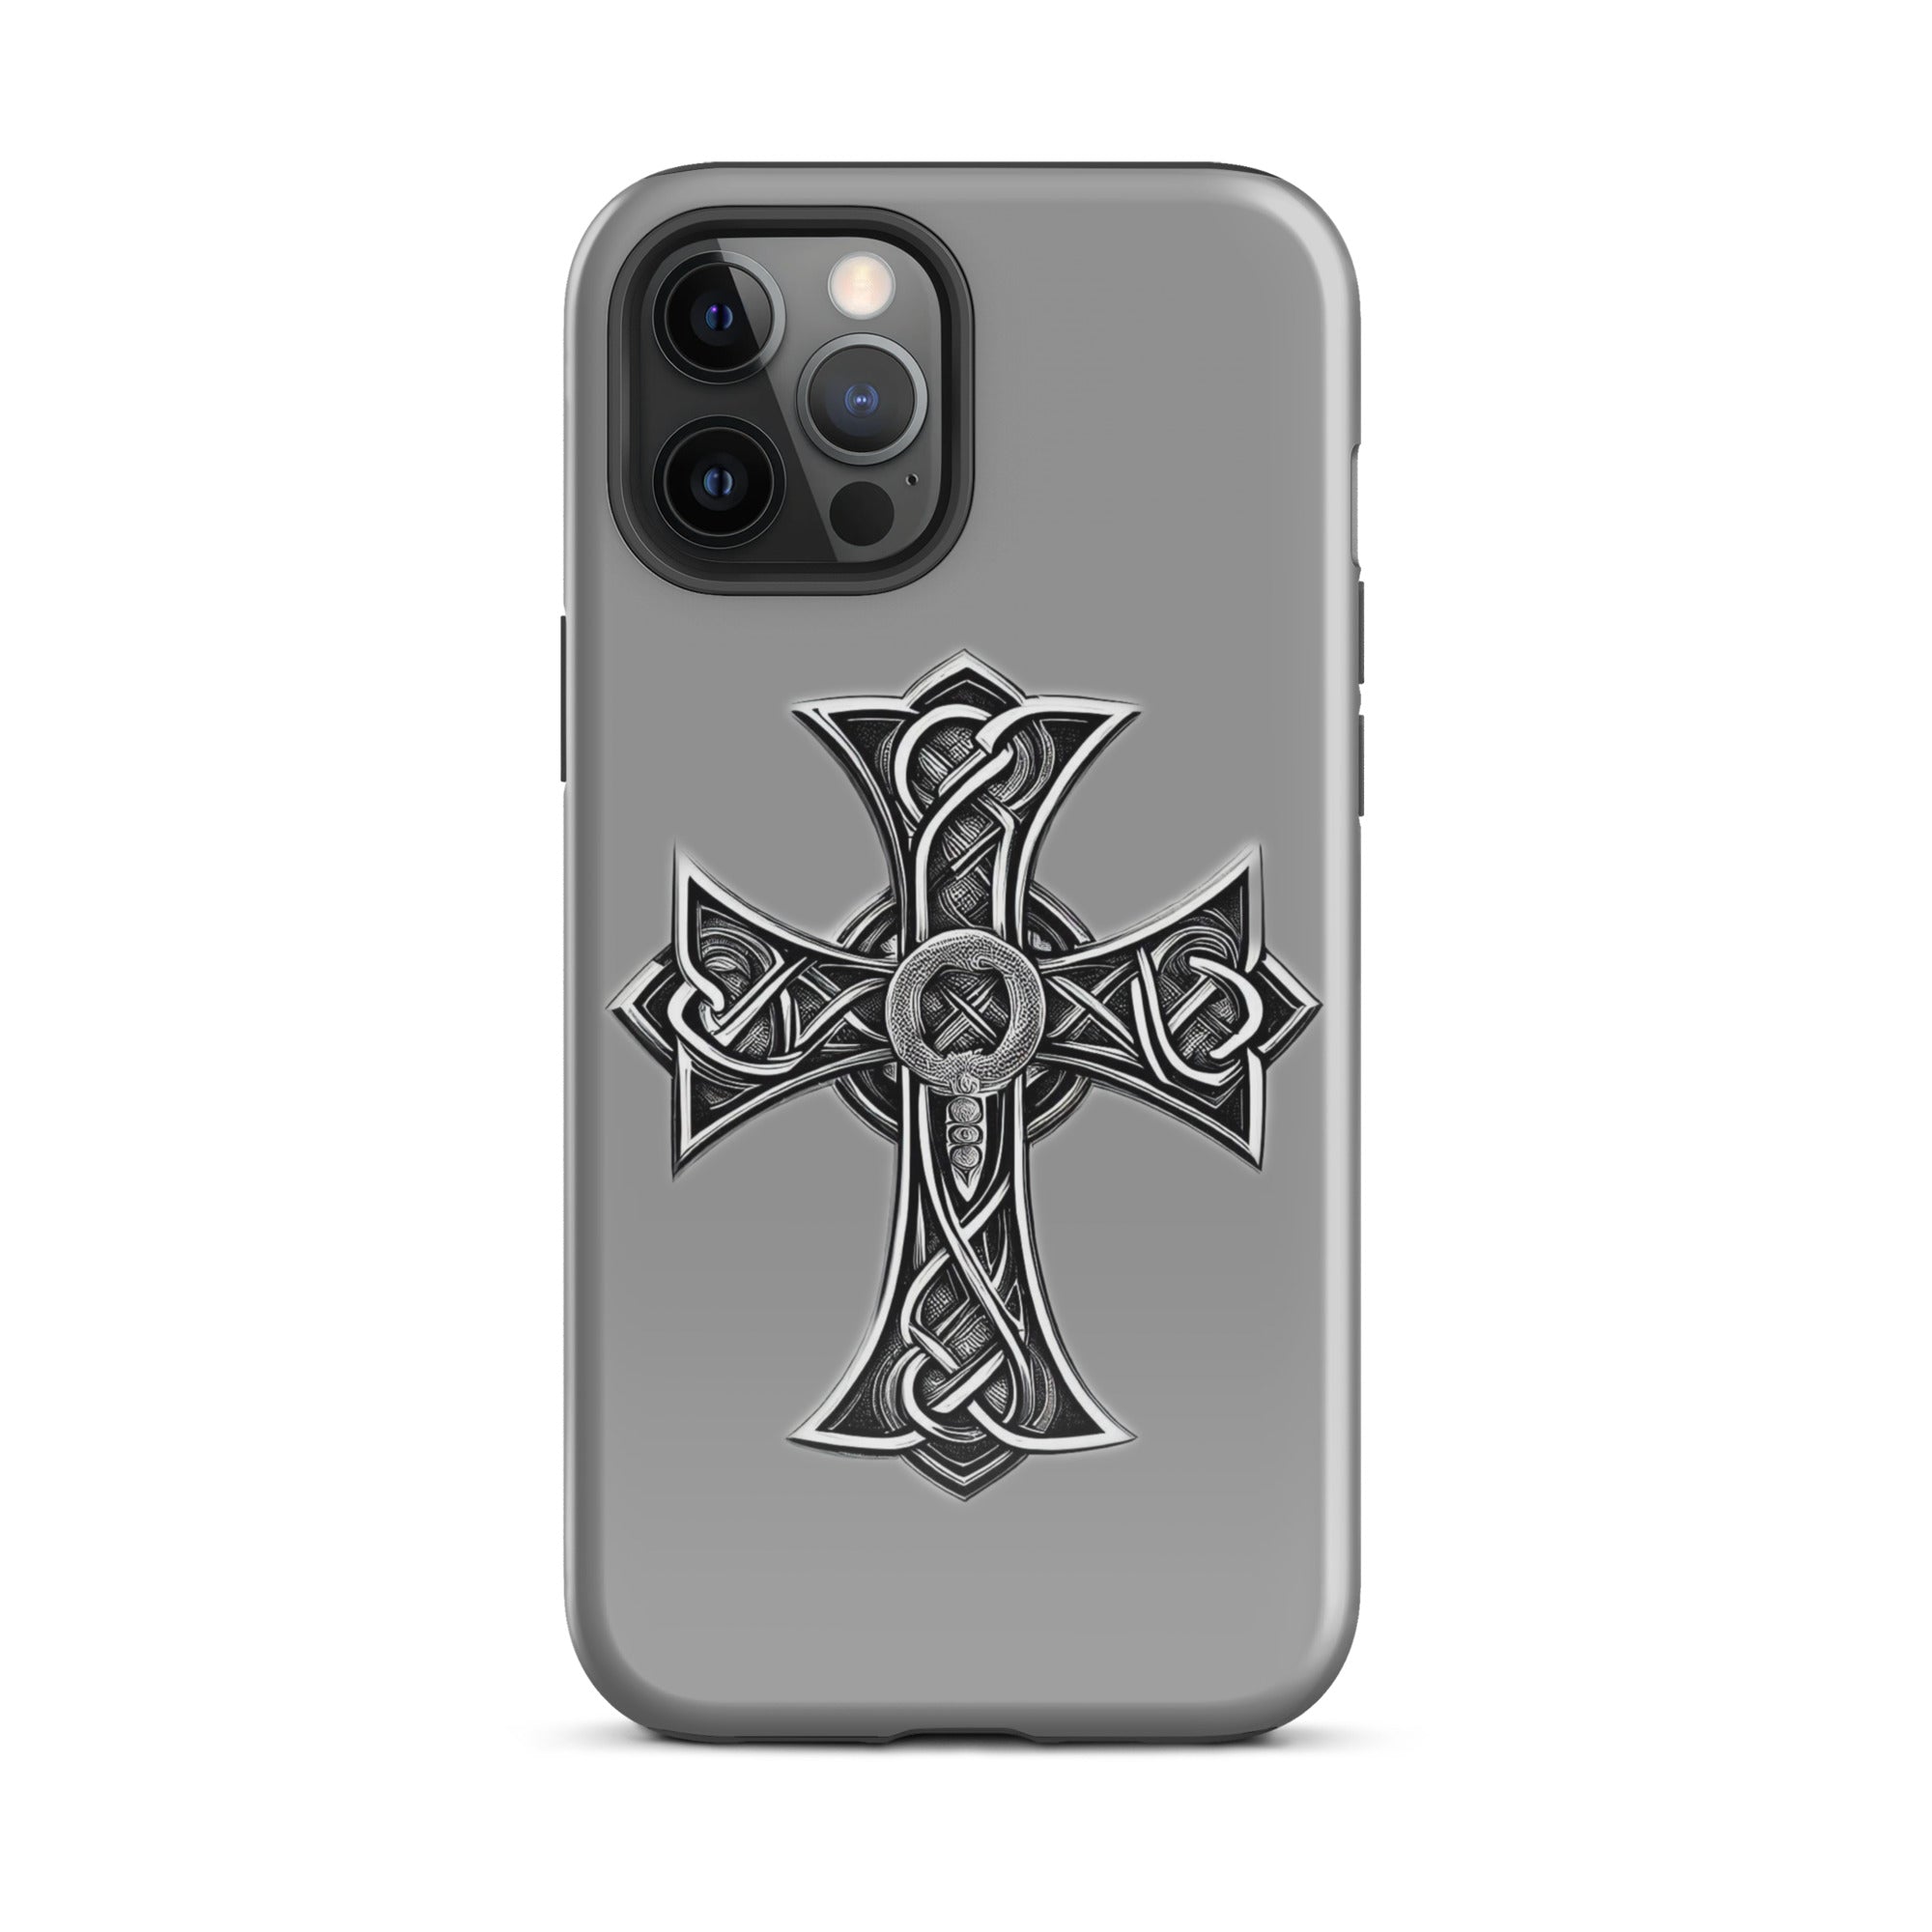 tough-case-for-iphone-glossy-iphone-12-pro-max-front-6563847714004.jpg